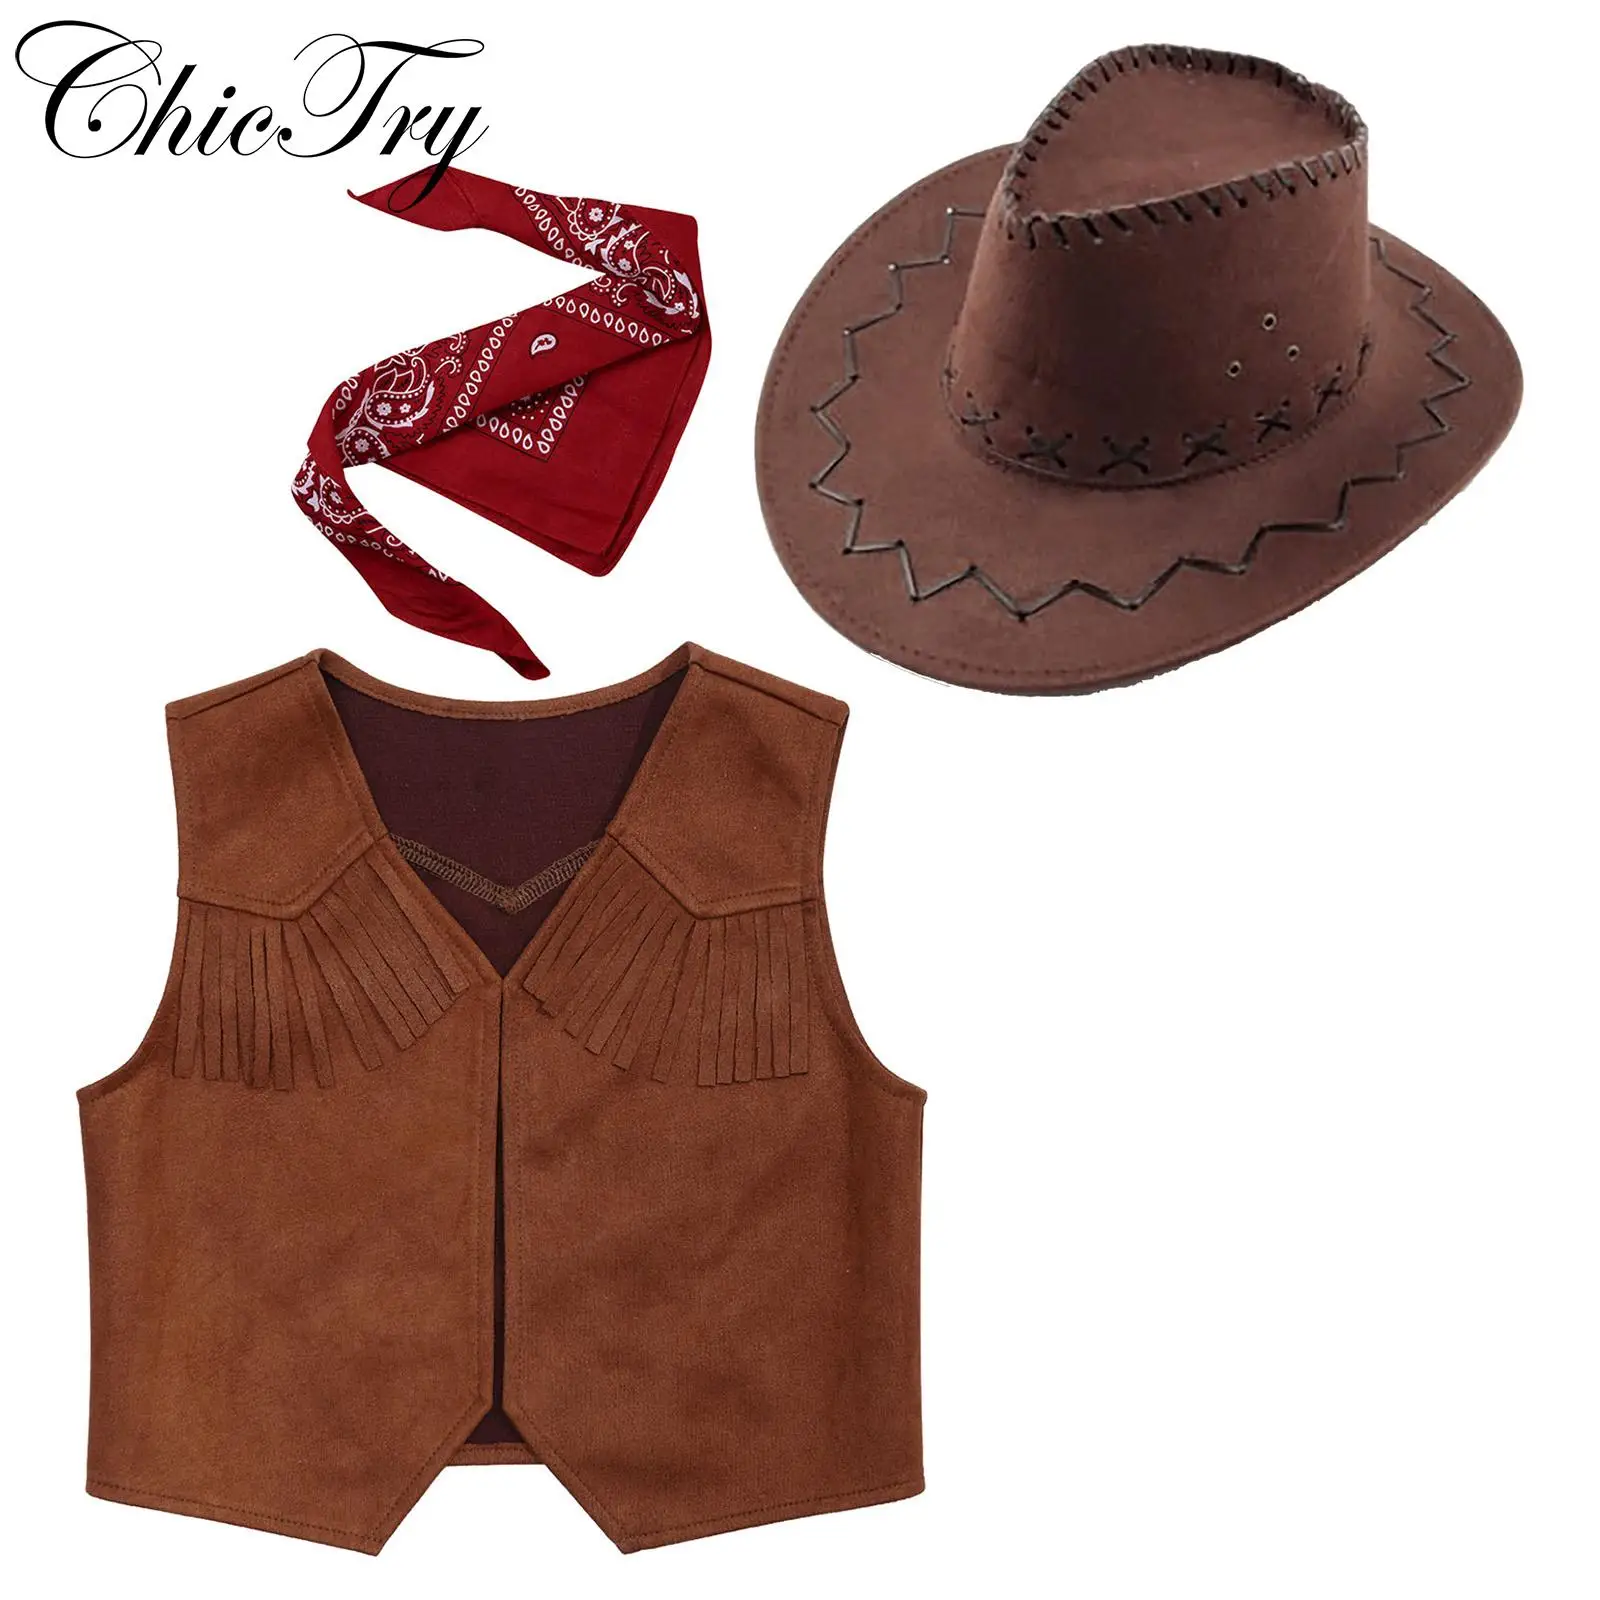 

Kids Boys Western Cowboy Costume Child Vest with Bandanna and Hat for Halloween Carnival Cosplay Themed Party Roleplay Dress Up